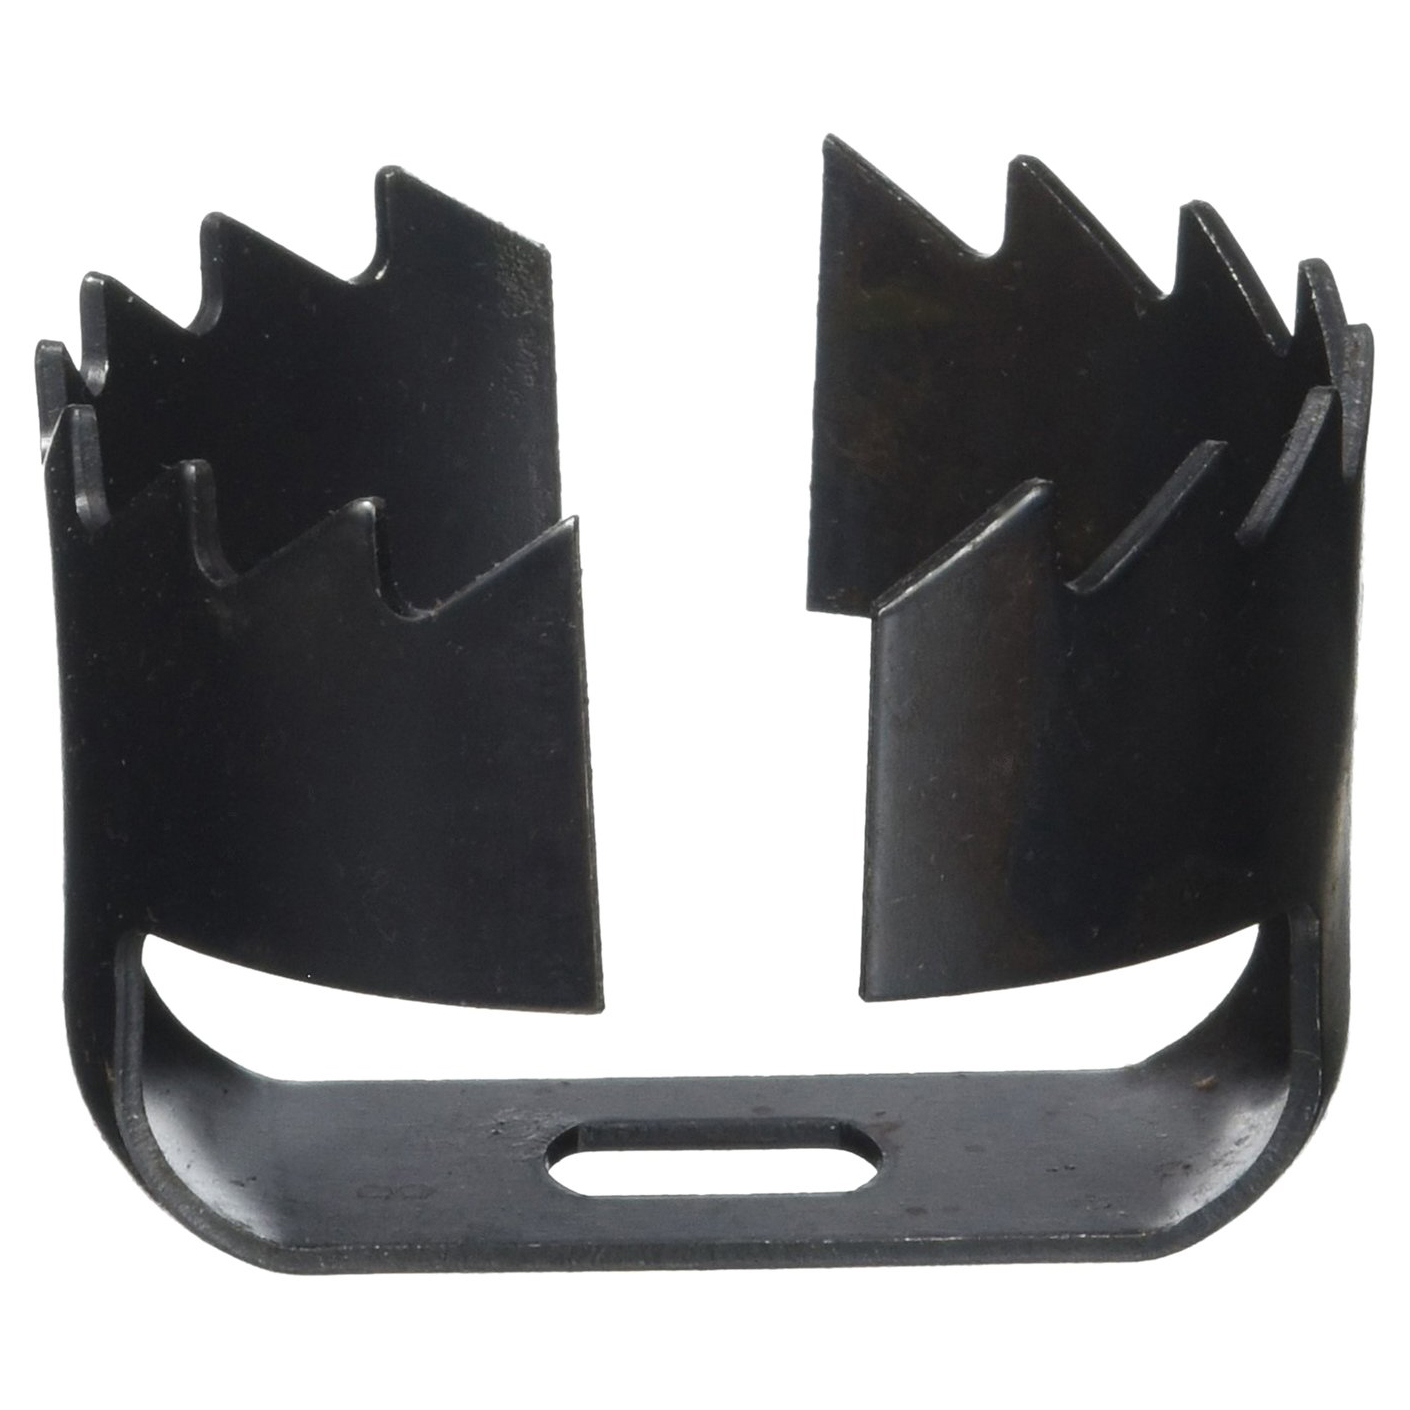 BLADES SET T13 98070 REPLACEMENT FOR T-103 SAWTOOTH CUTTER